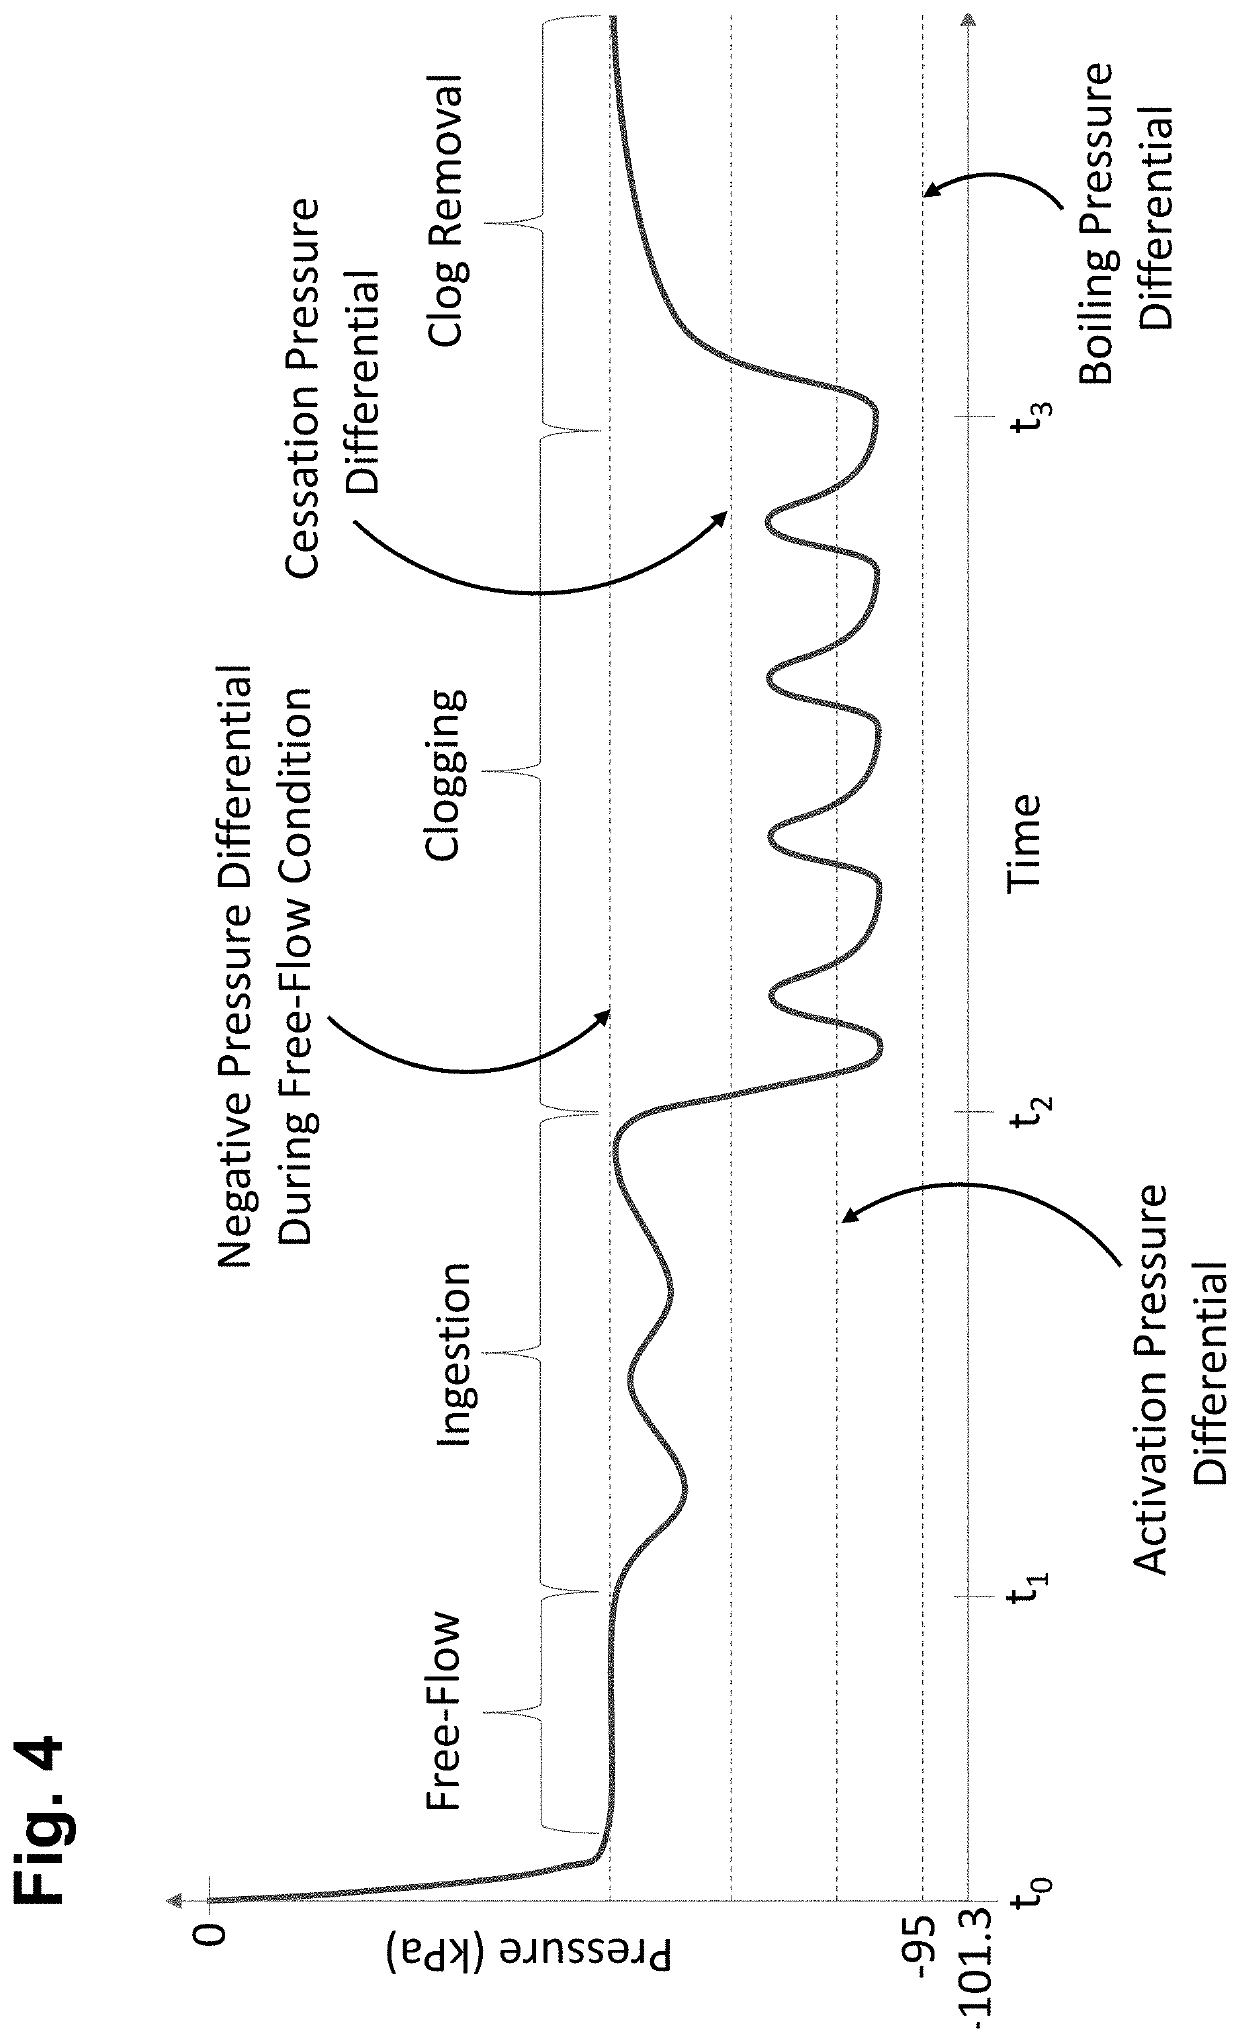 Mechanically resonant pulse relief valve for assisted clearing of plugged aspiration